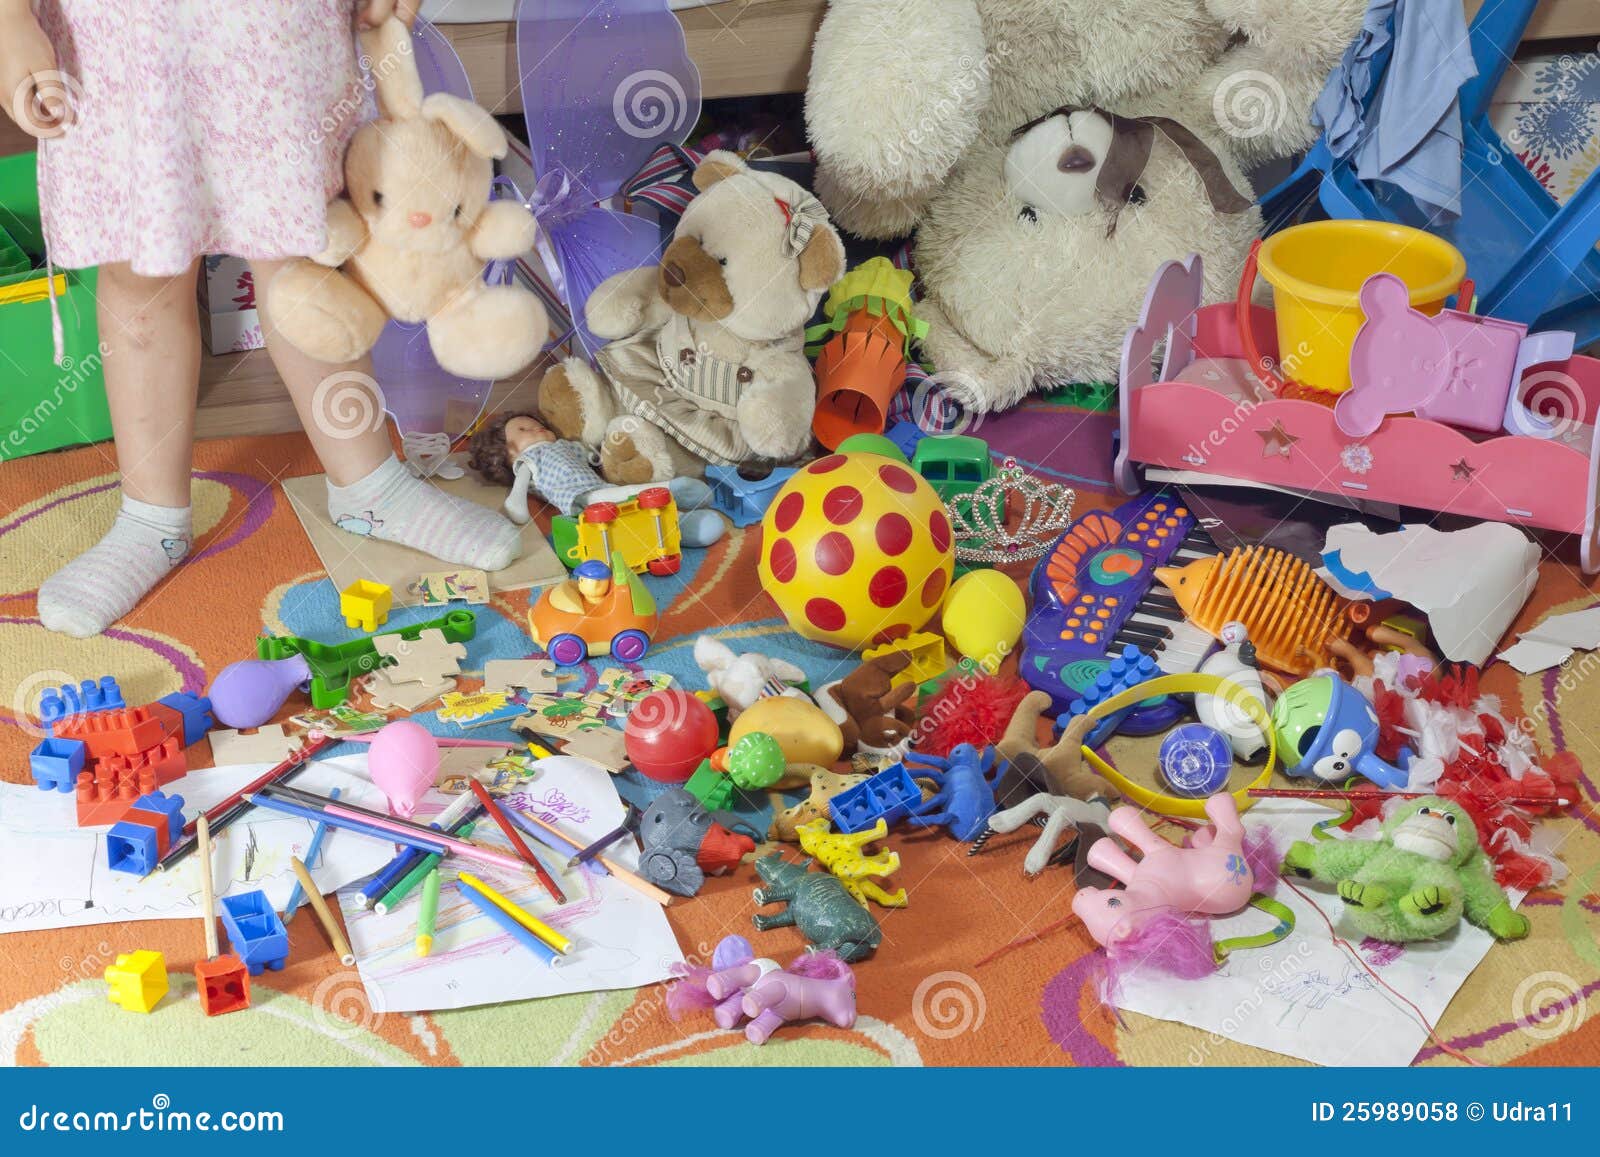 Room With Toys 90